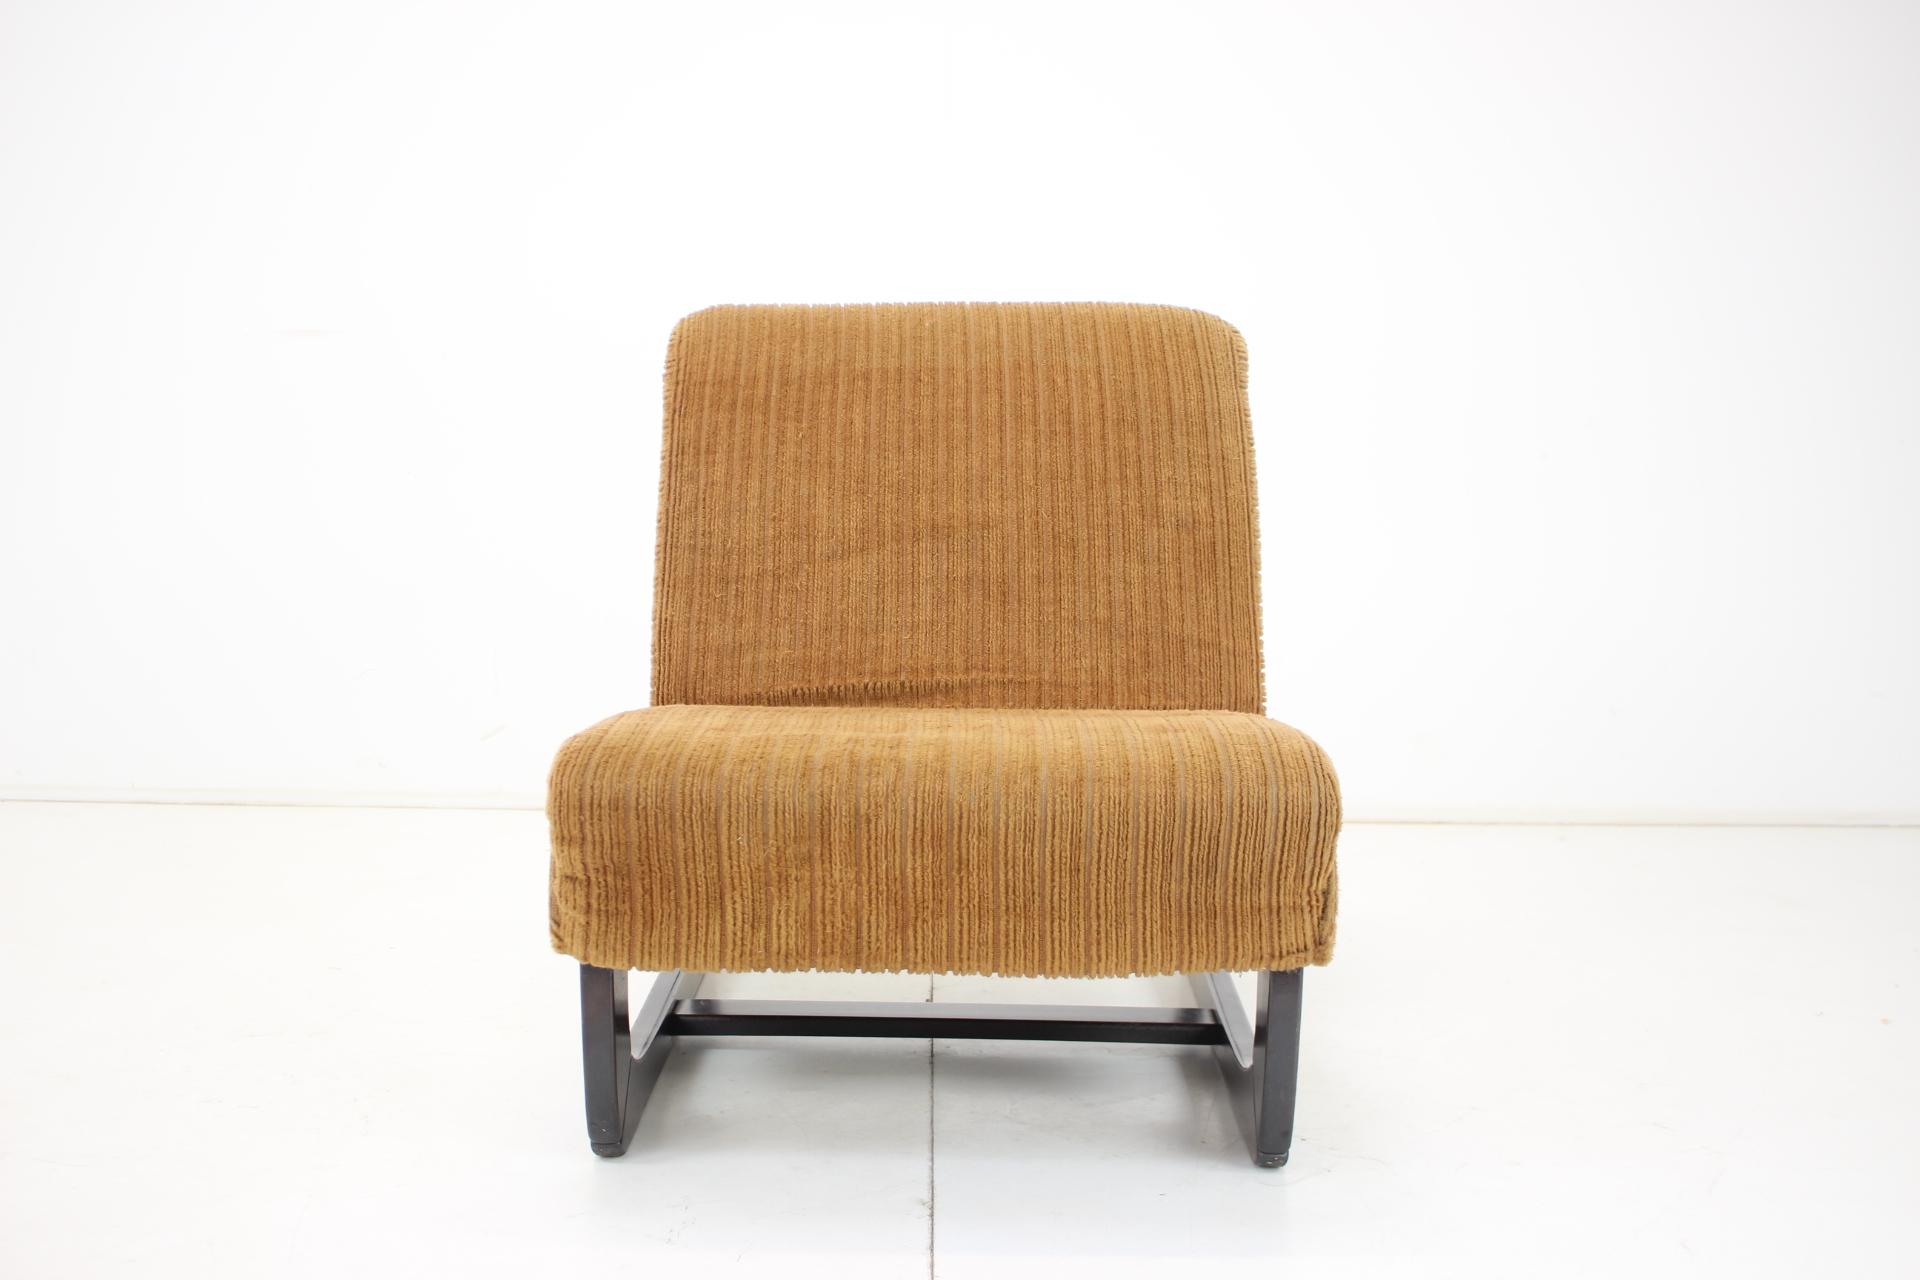 - made in Finland
- made of wood, fabric
- good, original condition.
- seat height 39 cm.
- fabric and wood show signs of use.